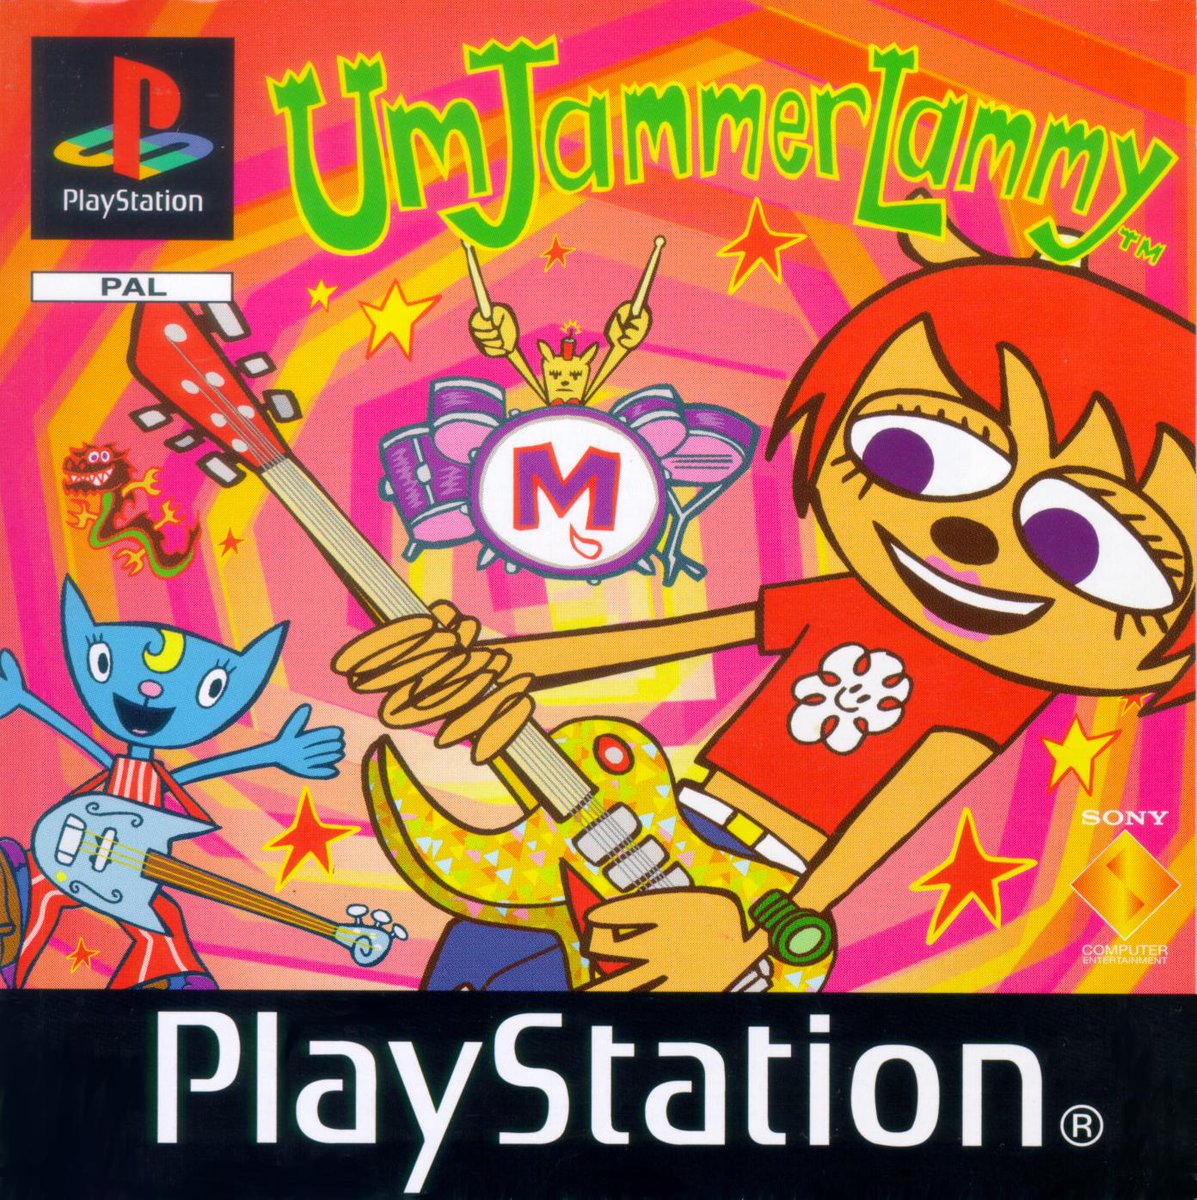 Umjammer Jenny and T'ai Fu Wrath of the Tiger are two #playstation games I have forgotten they existed.  Time to rectify that.  #retrogaming https://t.co/ObiwWwuPYs